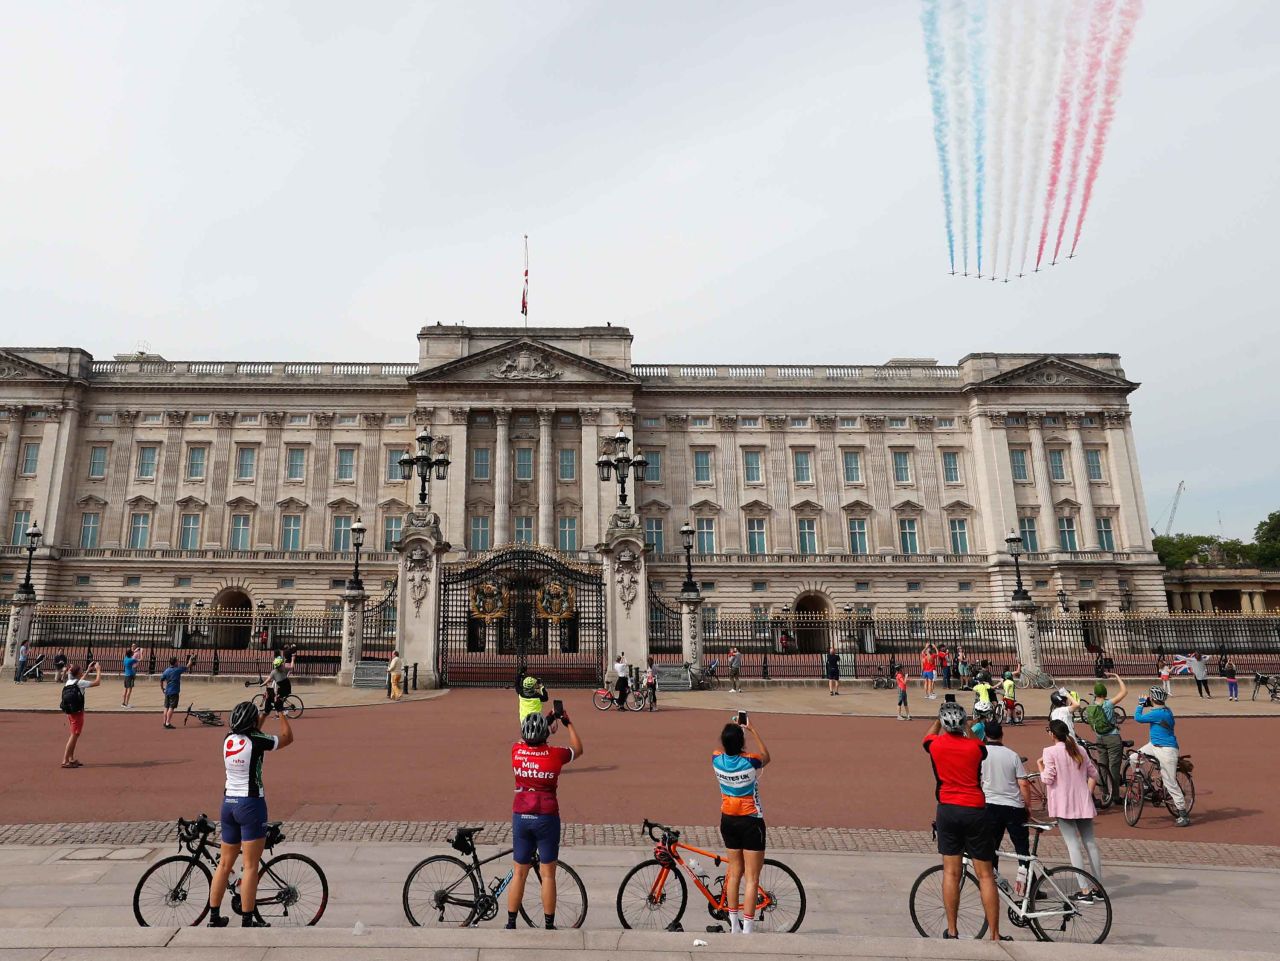 Cyclists watch as the Red Arrows fly over Buckingham Palace in London.